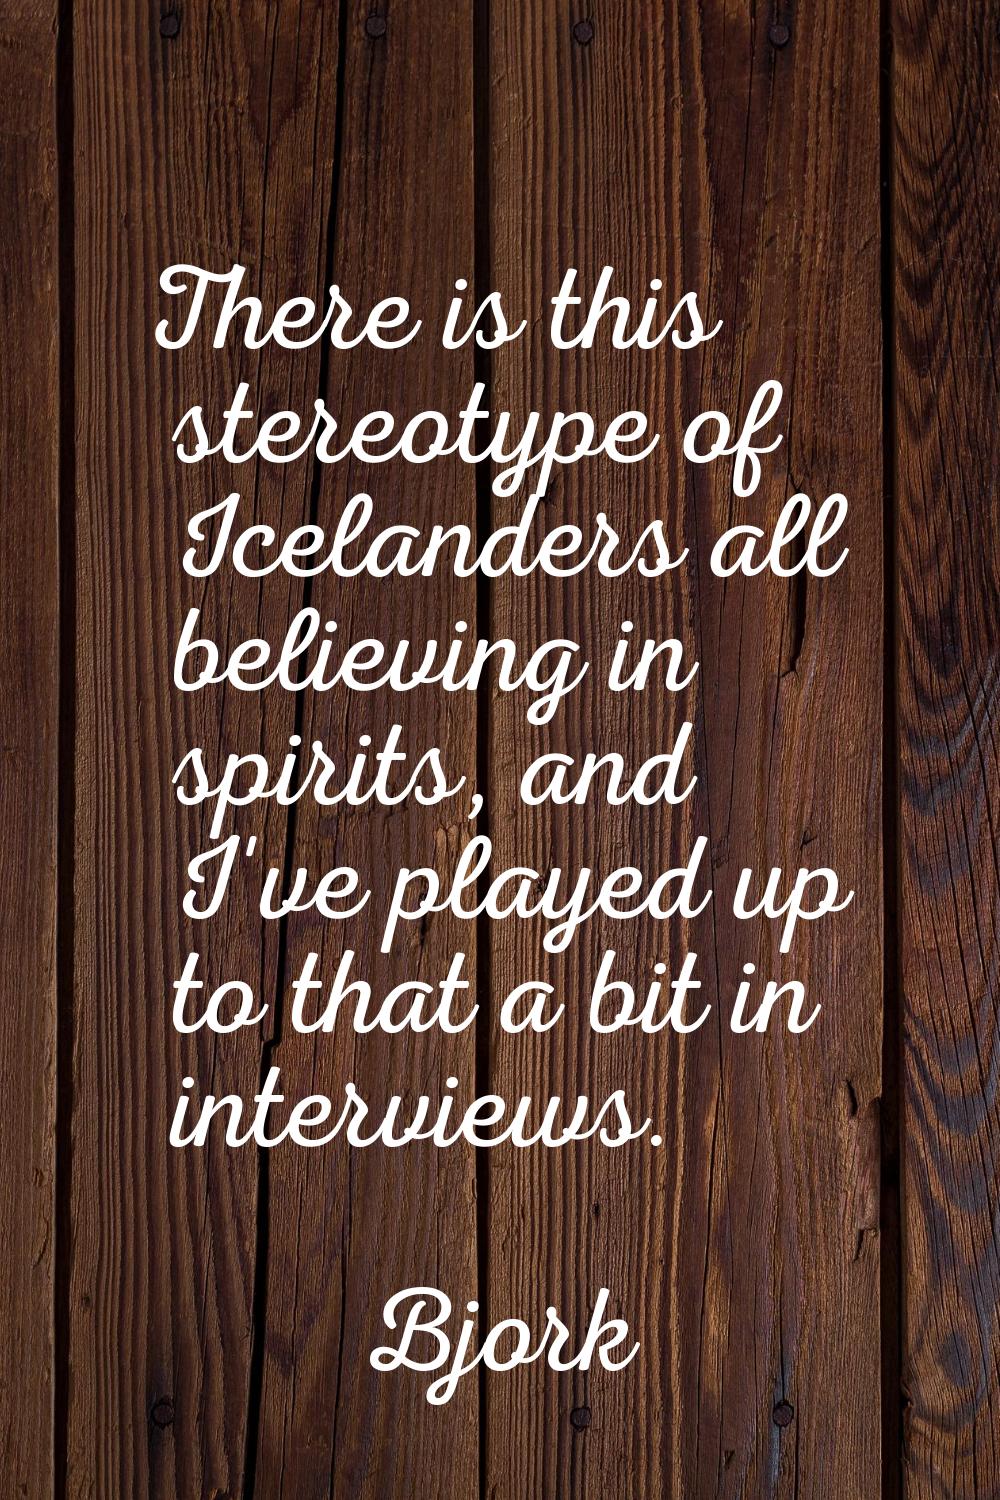 There is this stereotype of Icelanders all believing in spirits, and I've played up to that a bit i